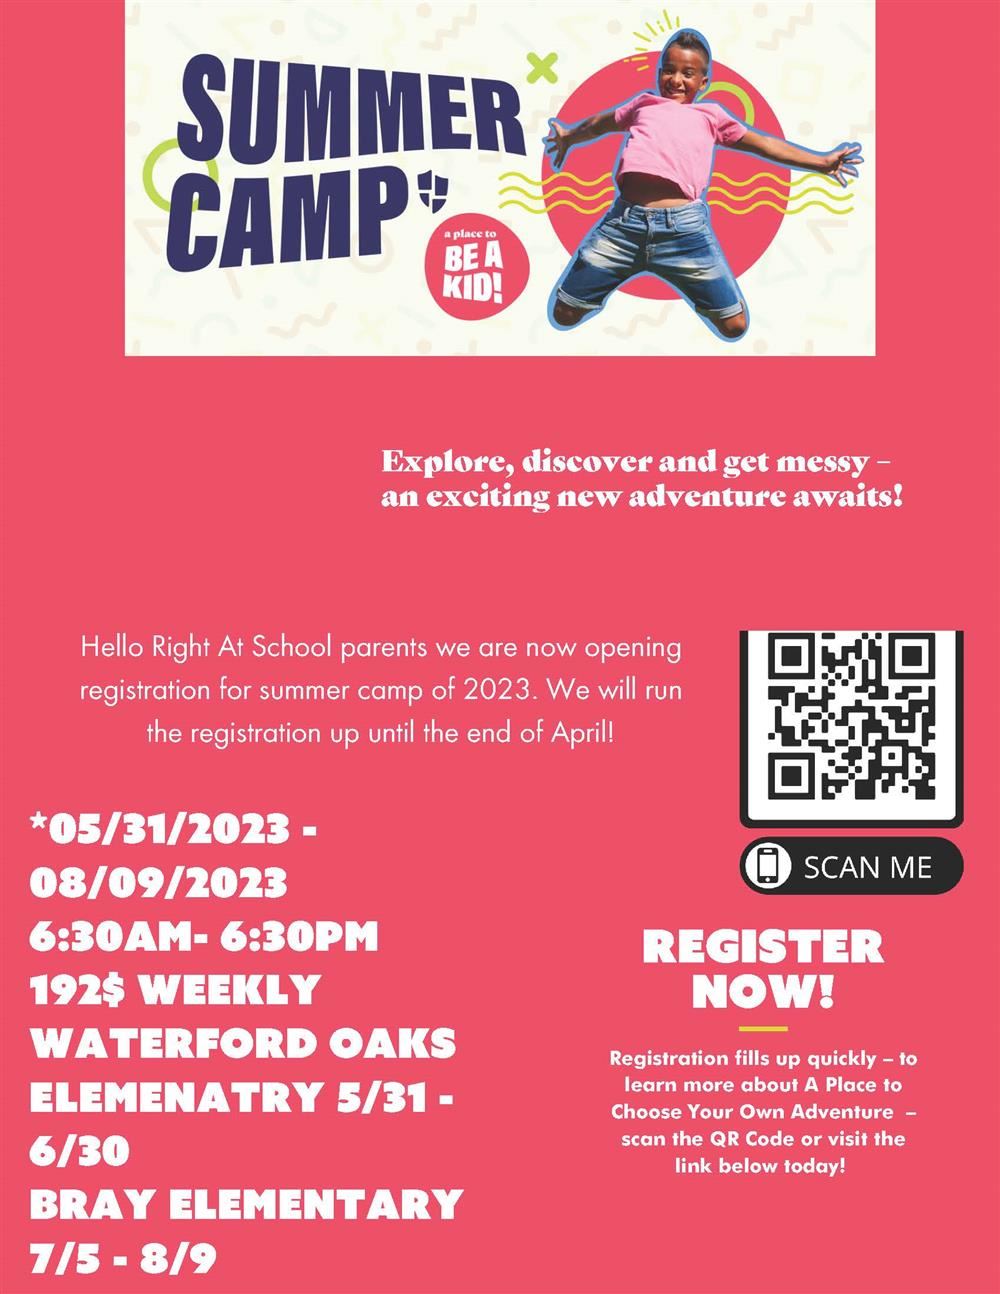 CHISD summer camp flyer